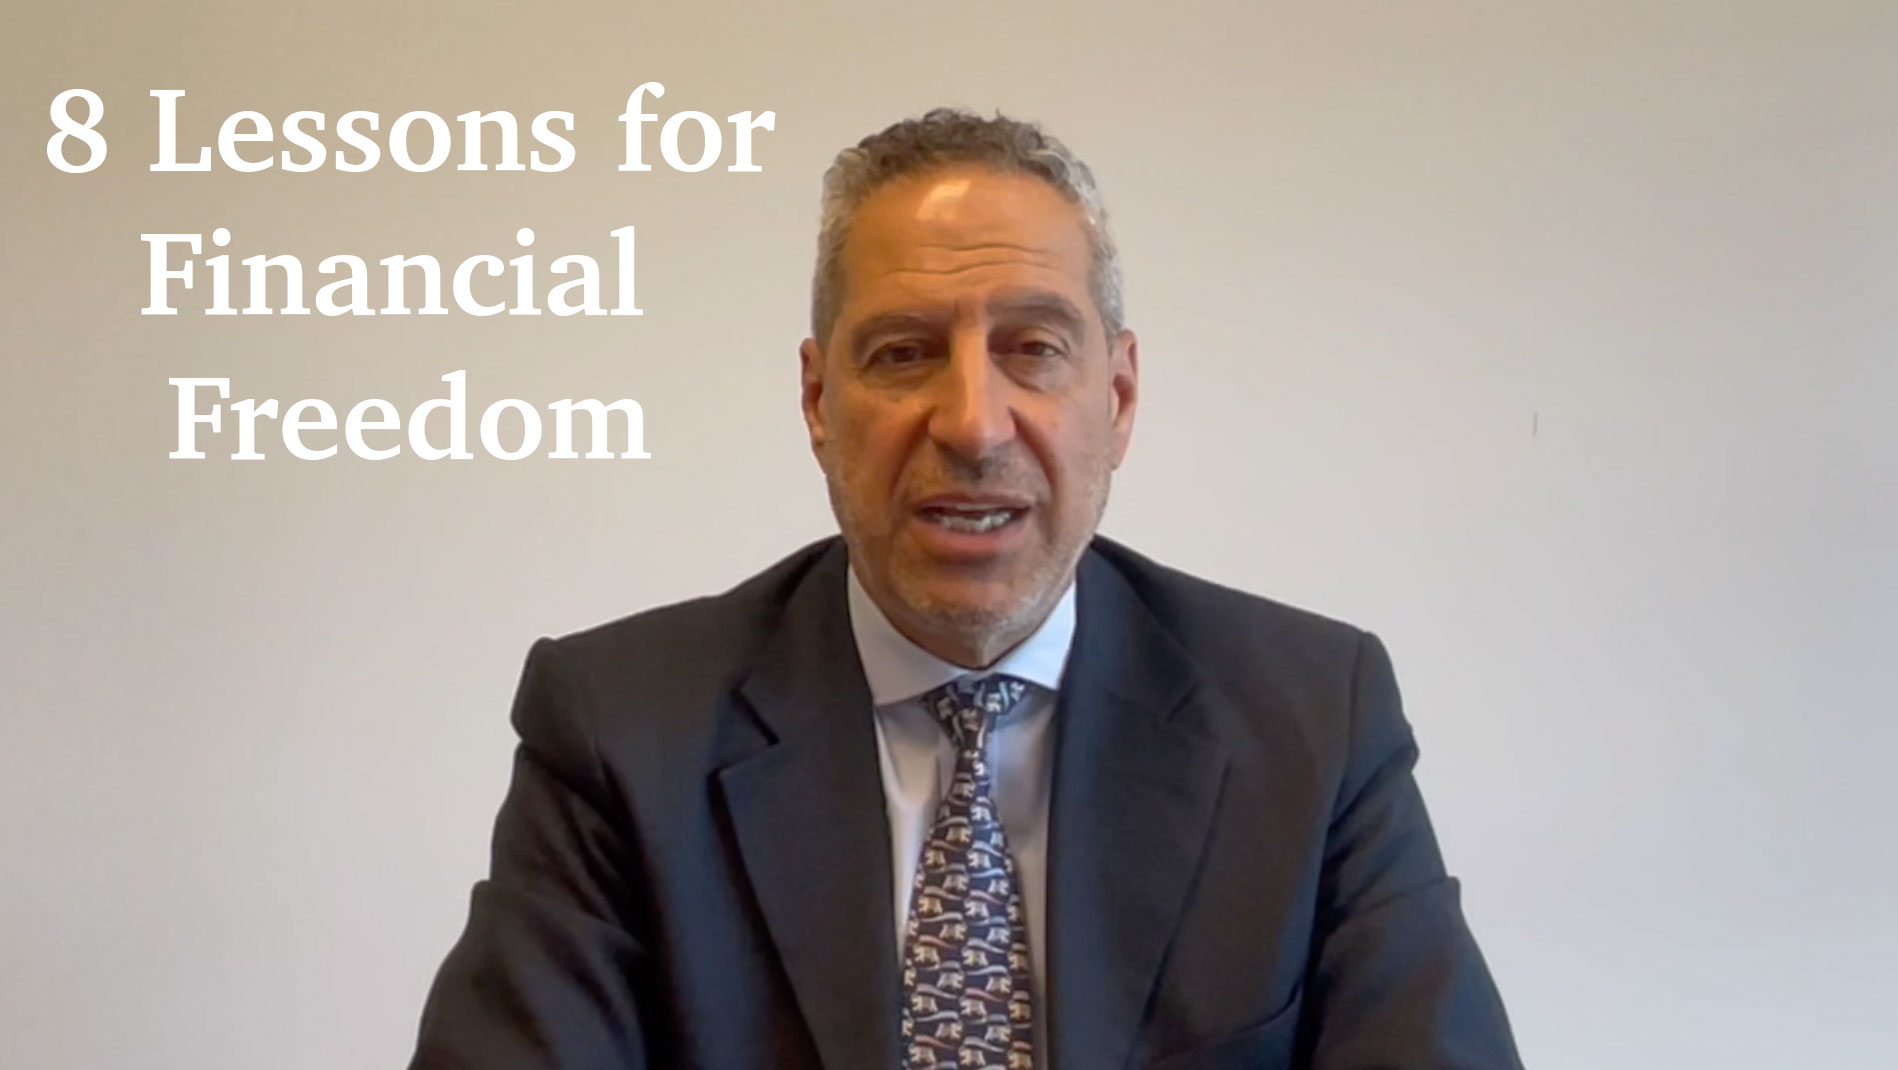 8 Lessons for Financial Freedom